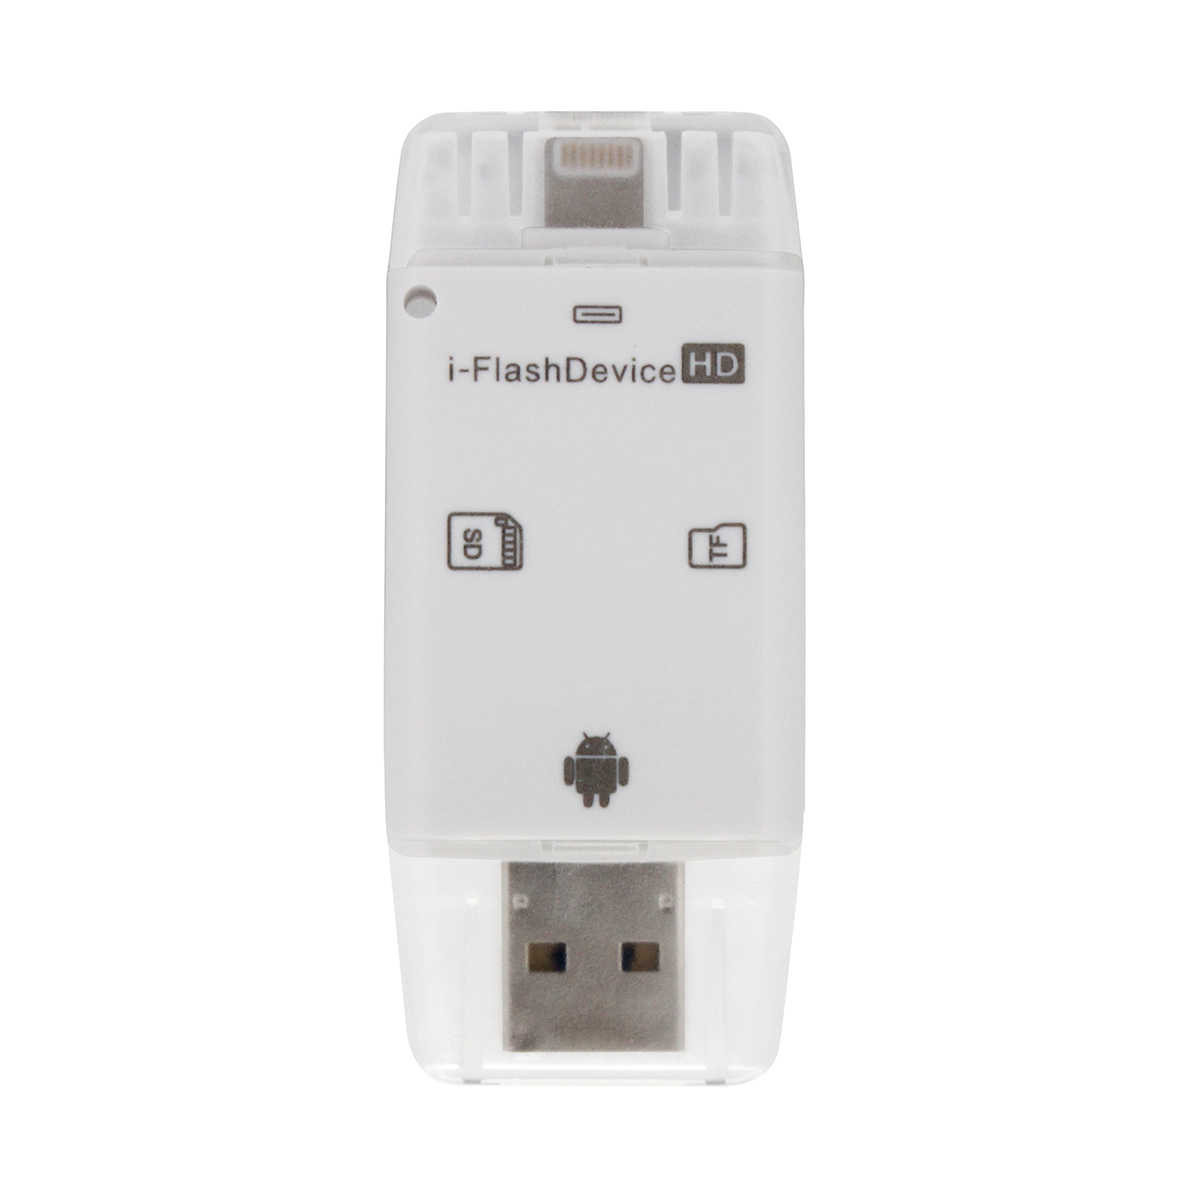 Universal Flash Drive SD Microsd TF Memory Card Reader for iPhone Android - White